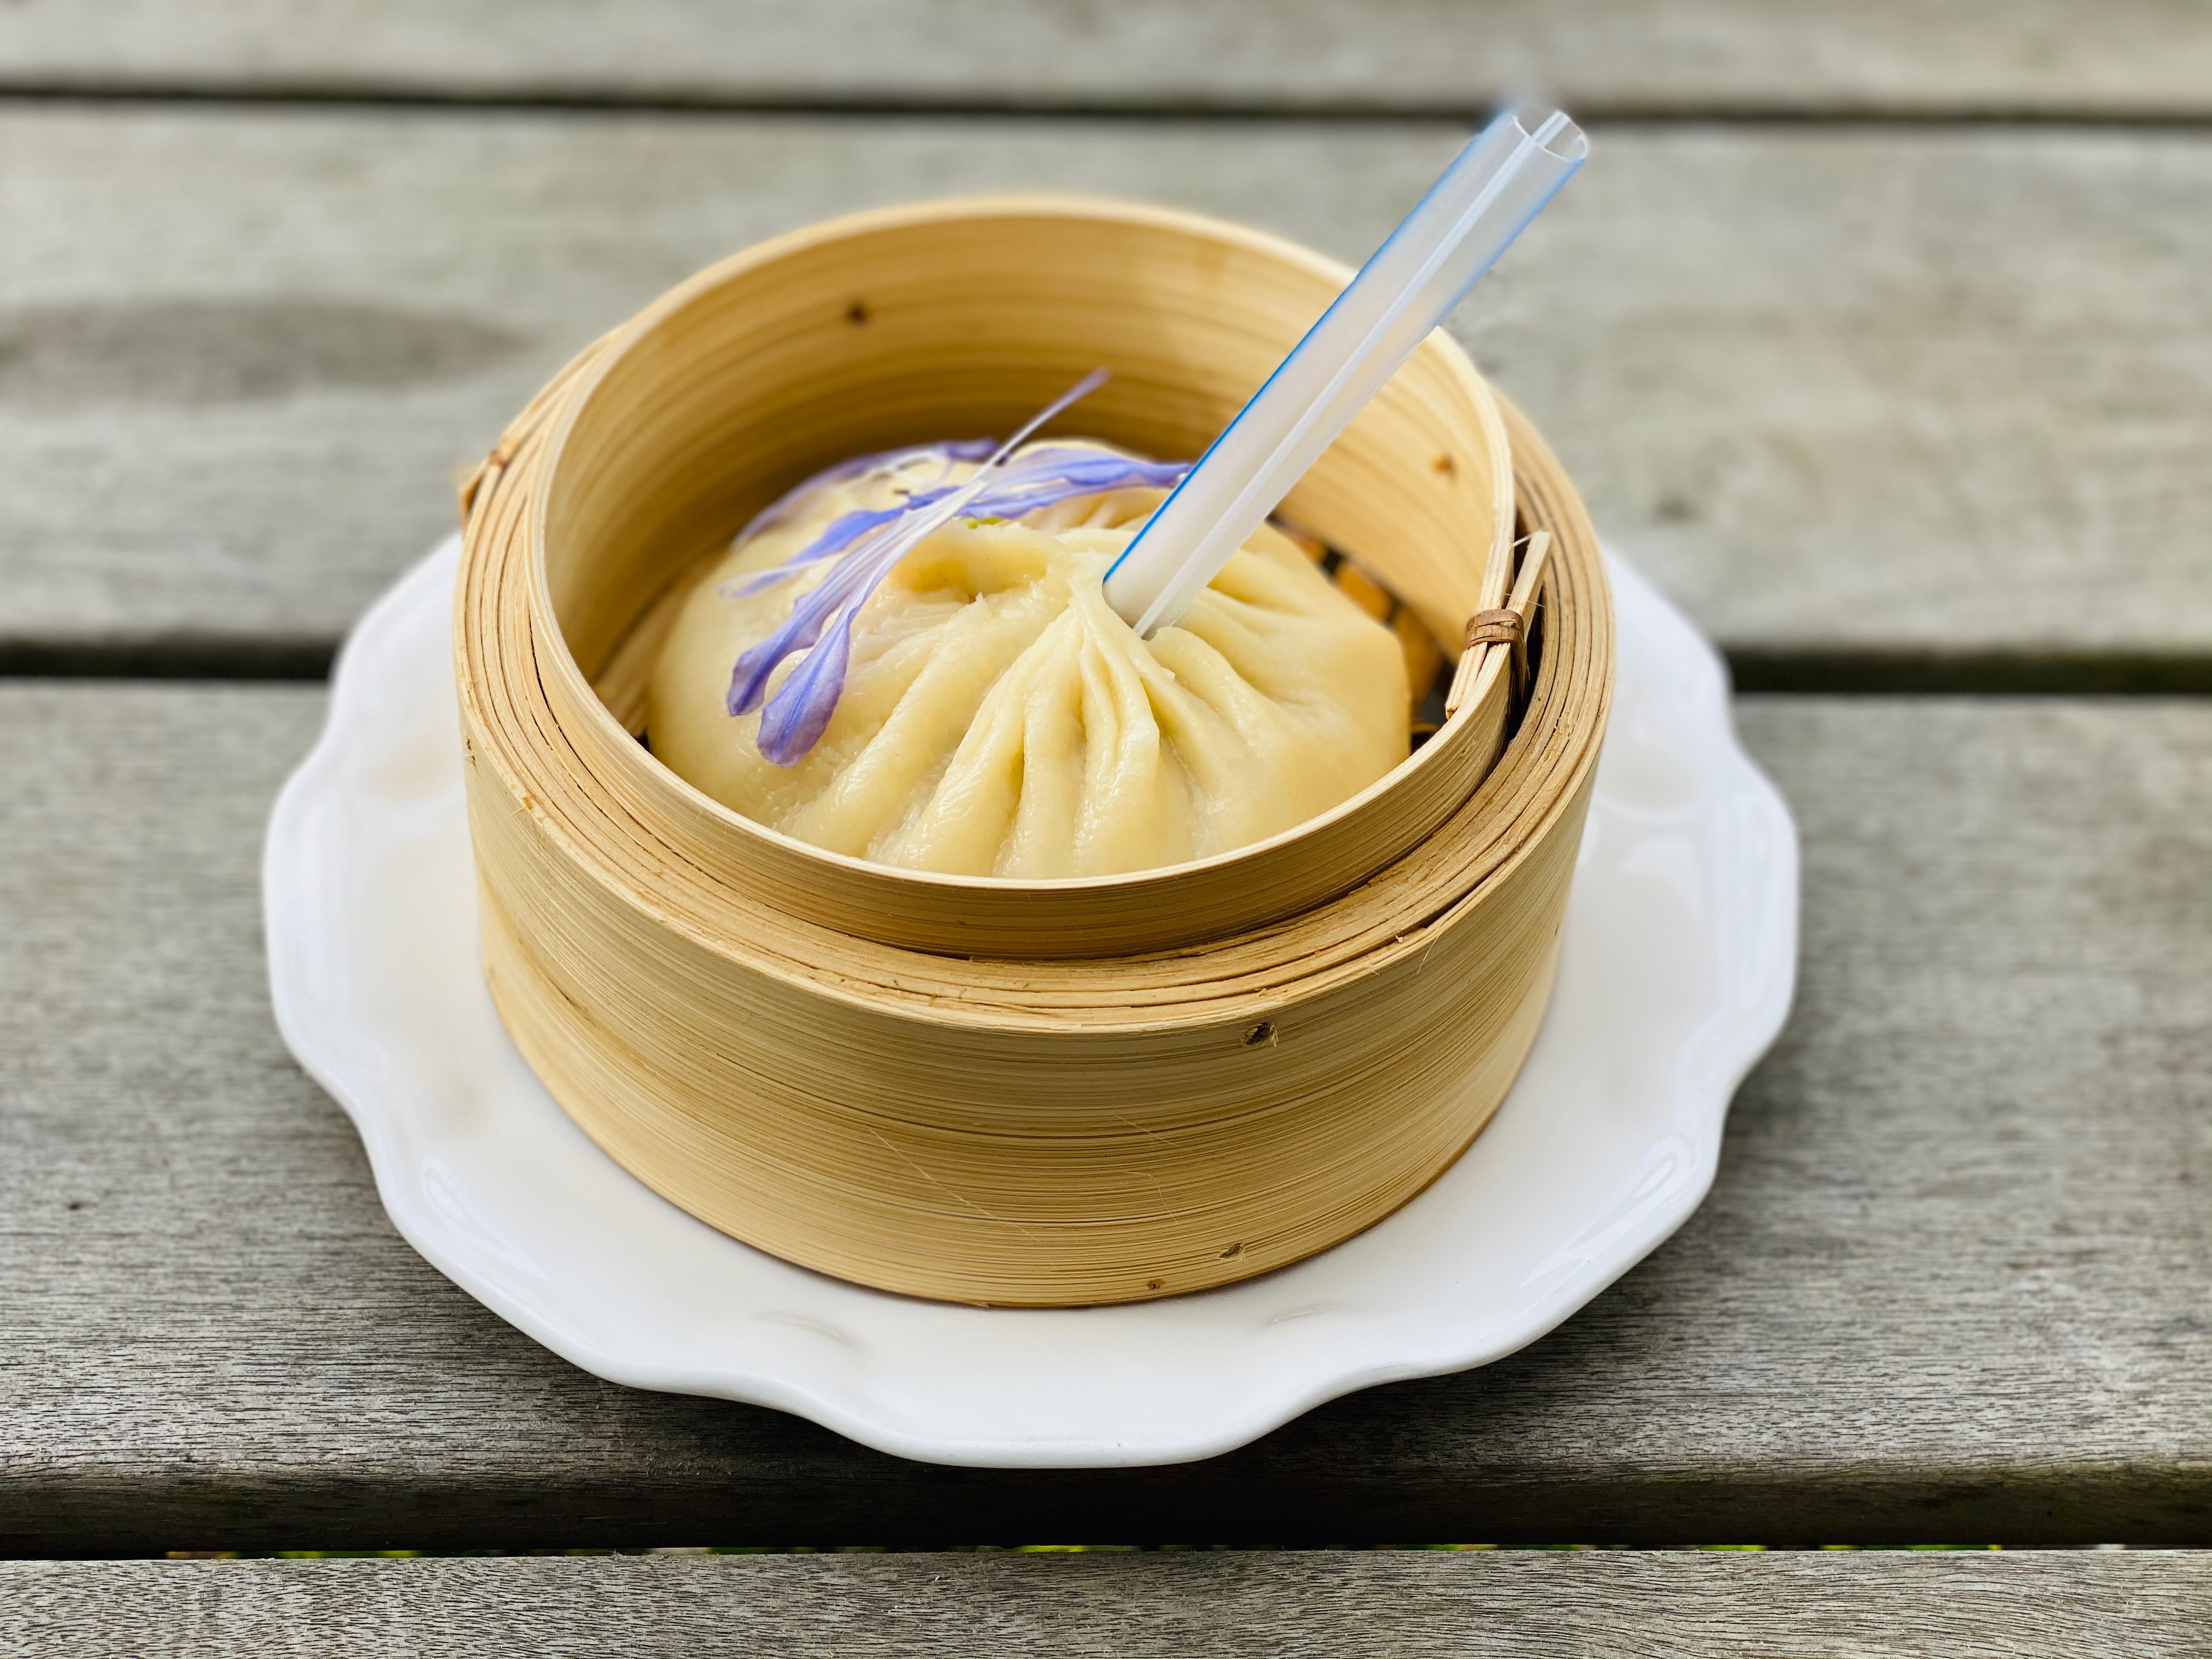 A jumbo-size soup dumpling, served with a straw